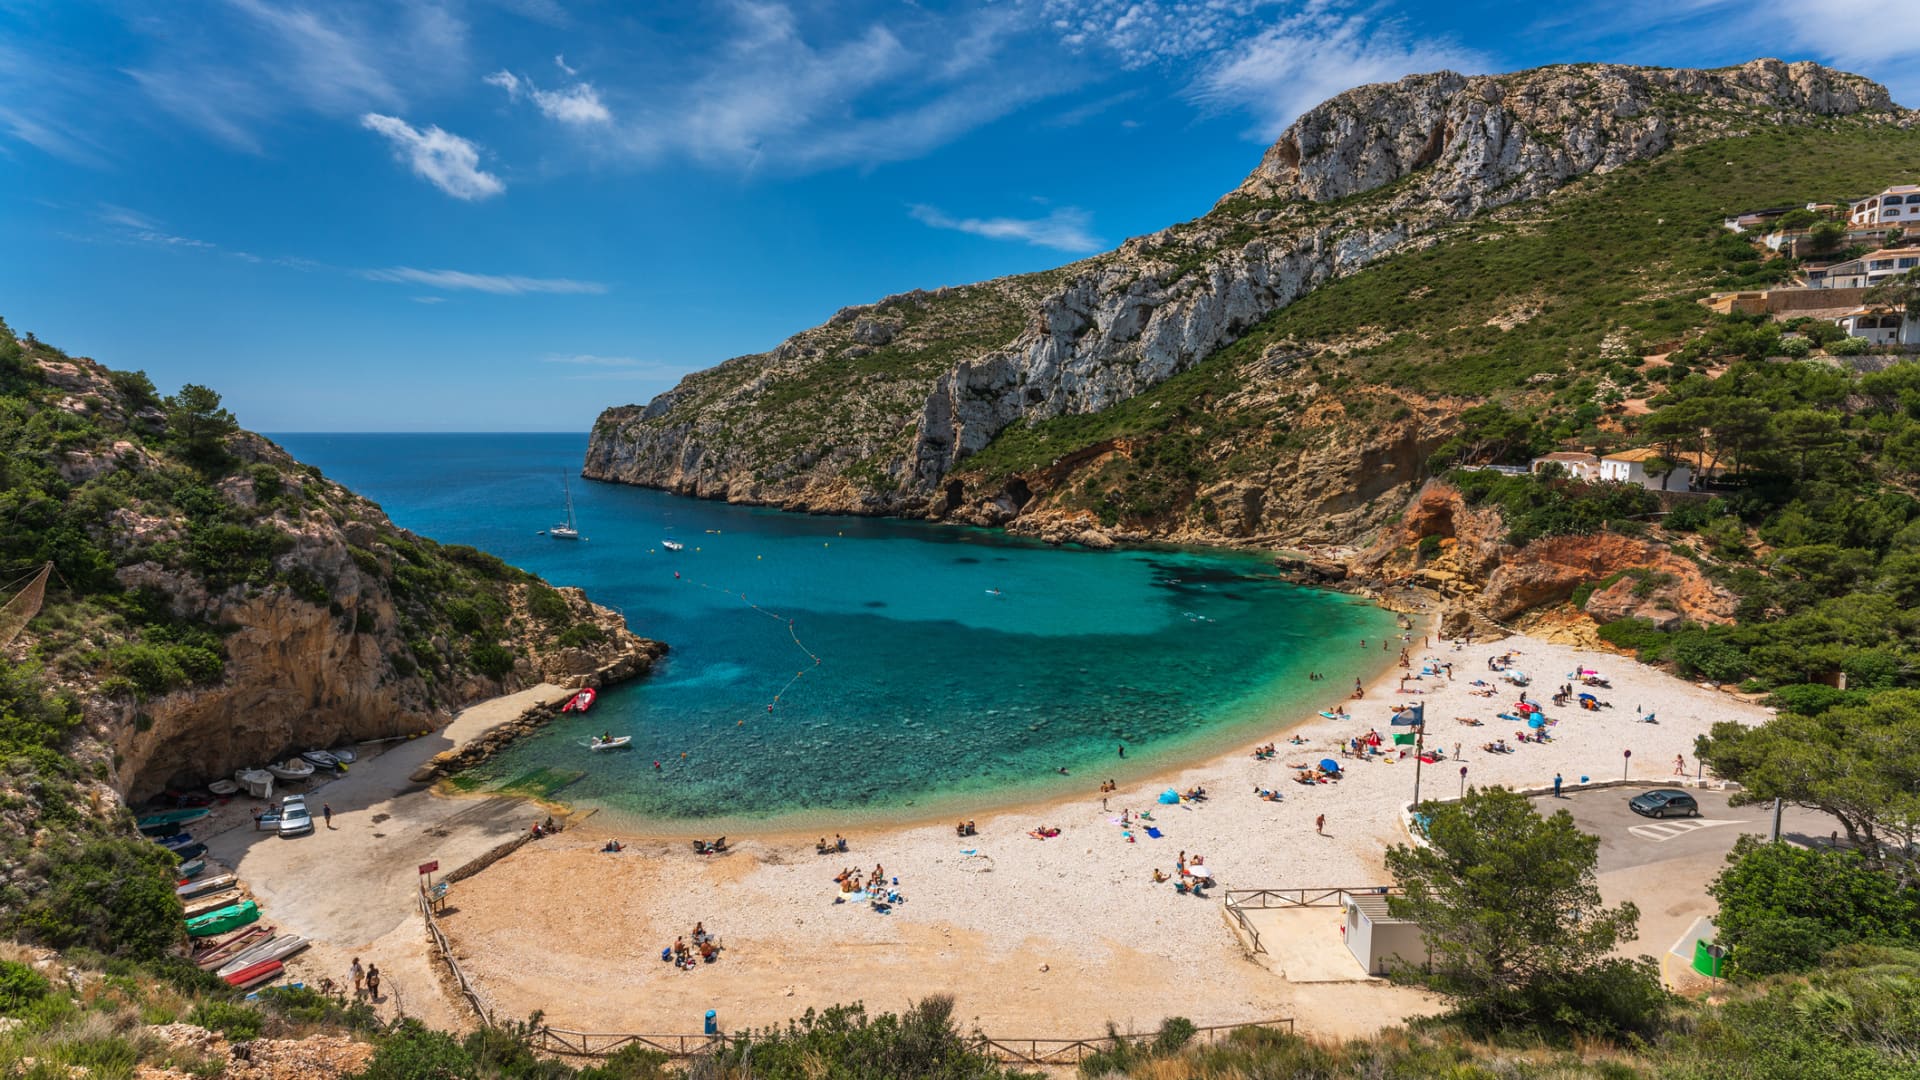 The beach cove Cala Granadella in Alicante is popular with Spanish people. Locals advise going early in the morning or off-season to avoid crowds.